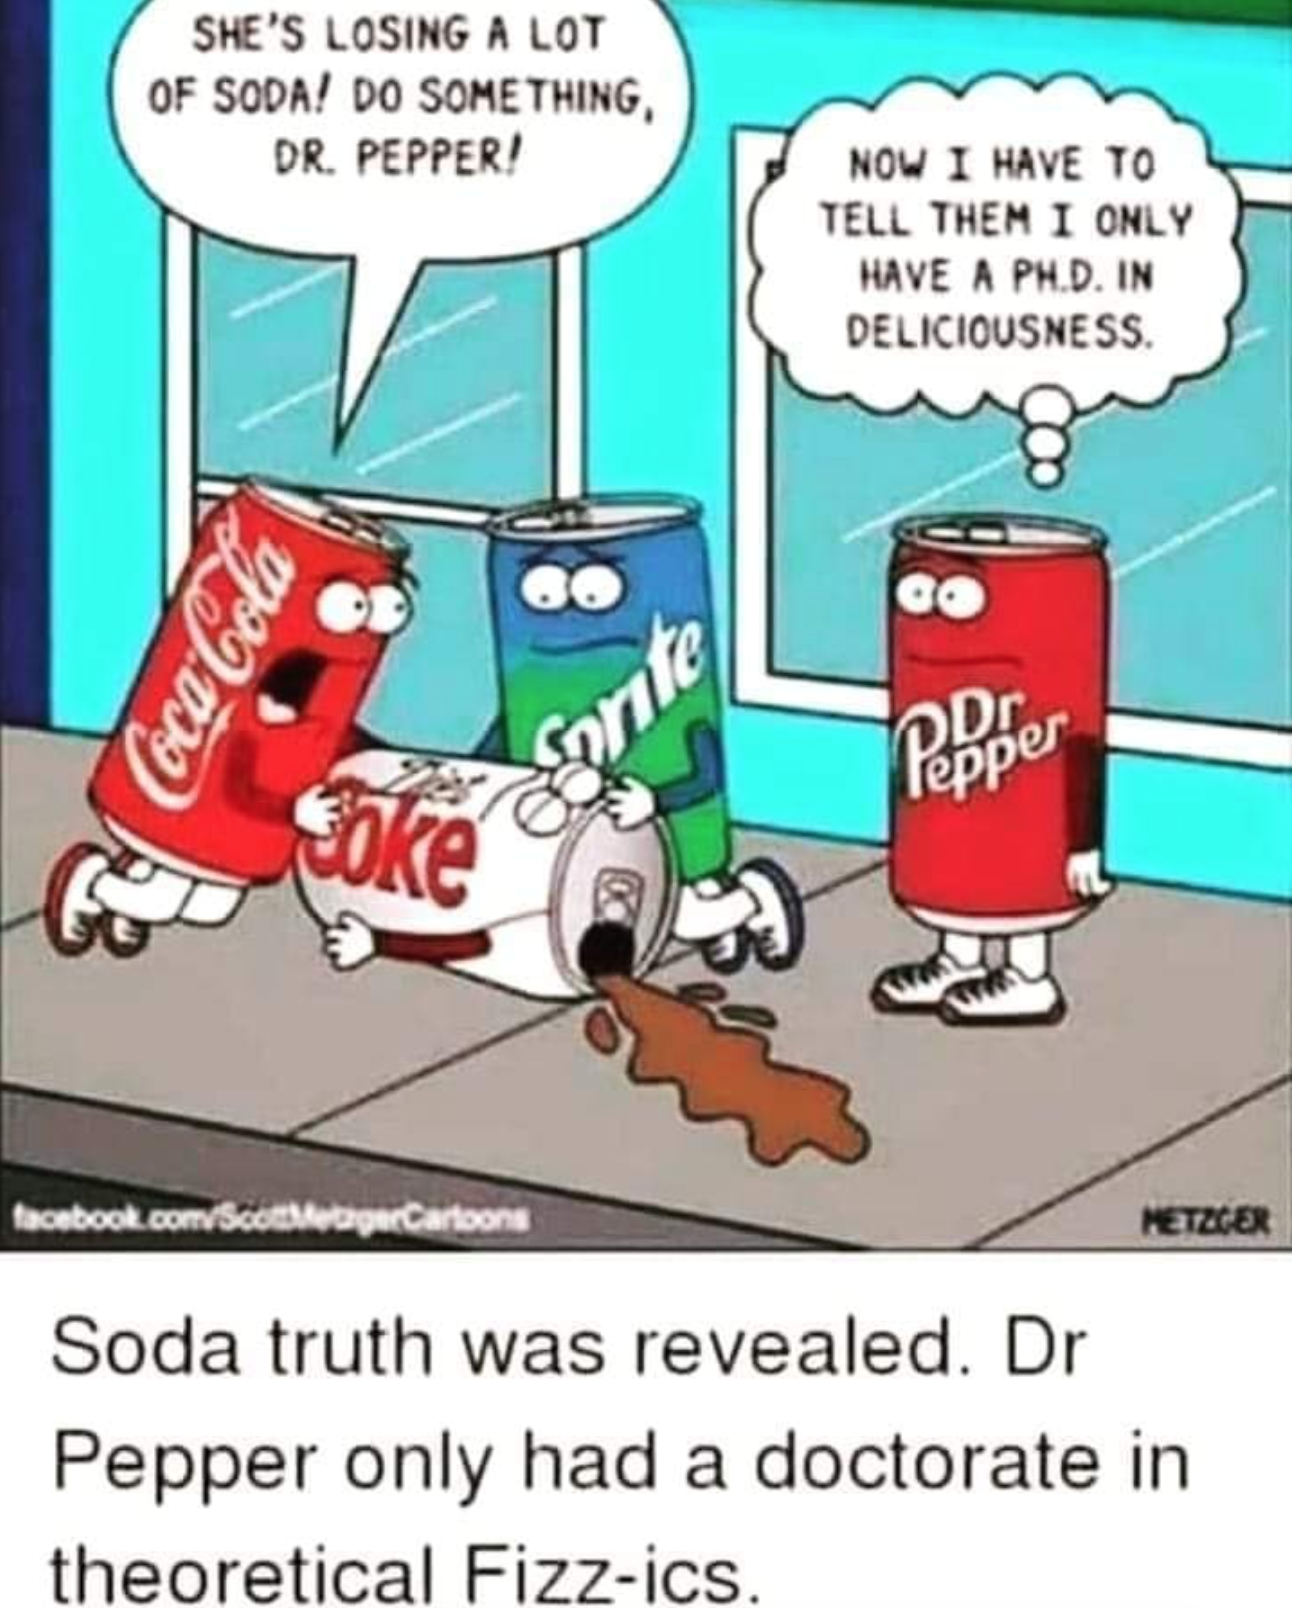 dr pepper as a doctor - She'S Losing A Lot Of Soda! Do Something, Dr. Pepper! Now I Have To Tell Them I Only Have A Ph.D. In Deliciousness. CocaCola Coke ante facebook.com Cartoon Netecer Soda truth was revealed. Dr Pepper only had a doctorate in theoreti